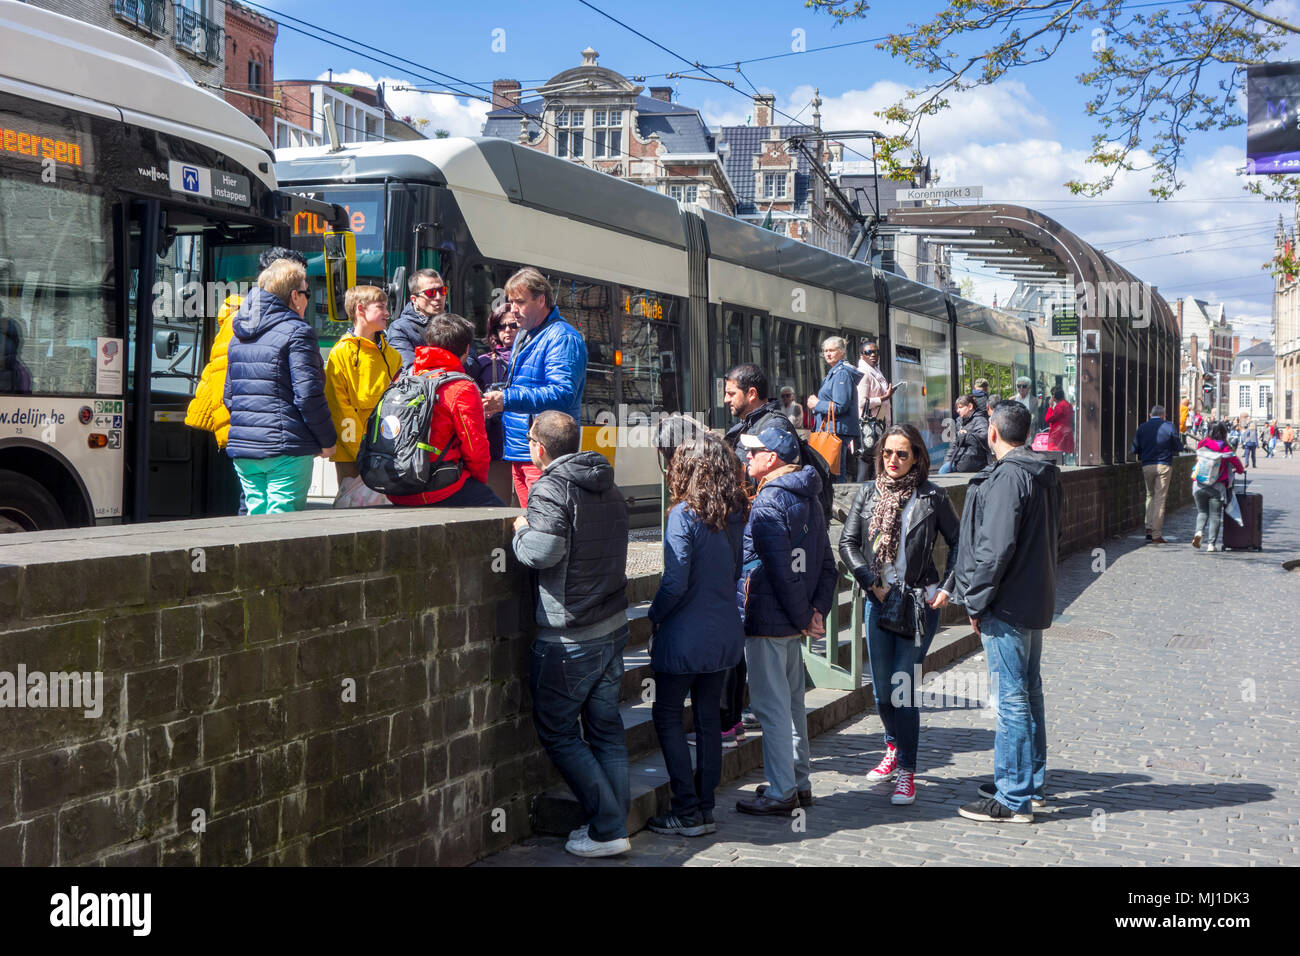 Tourists waiting for buses of De Lijn at bus stop in car free zone in the historic city centre of Ghent, East Flanders, Belgium Stock Photo